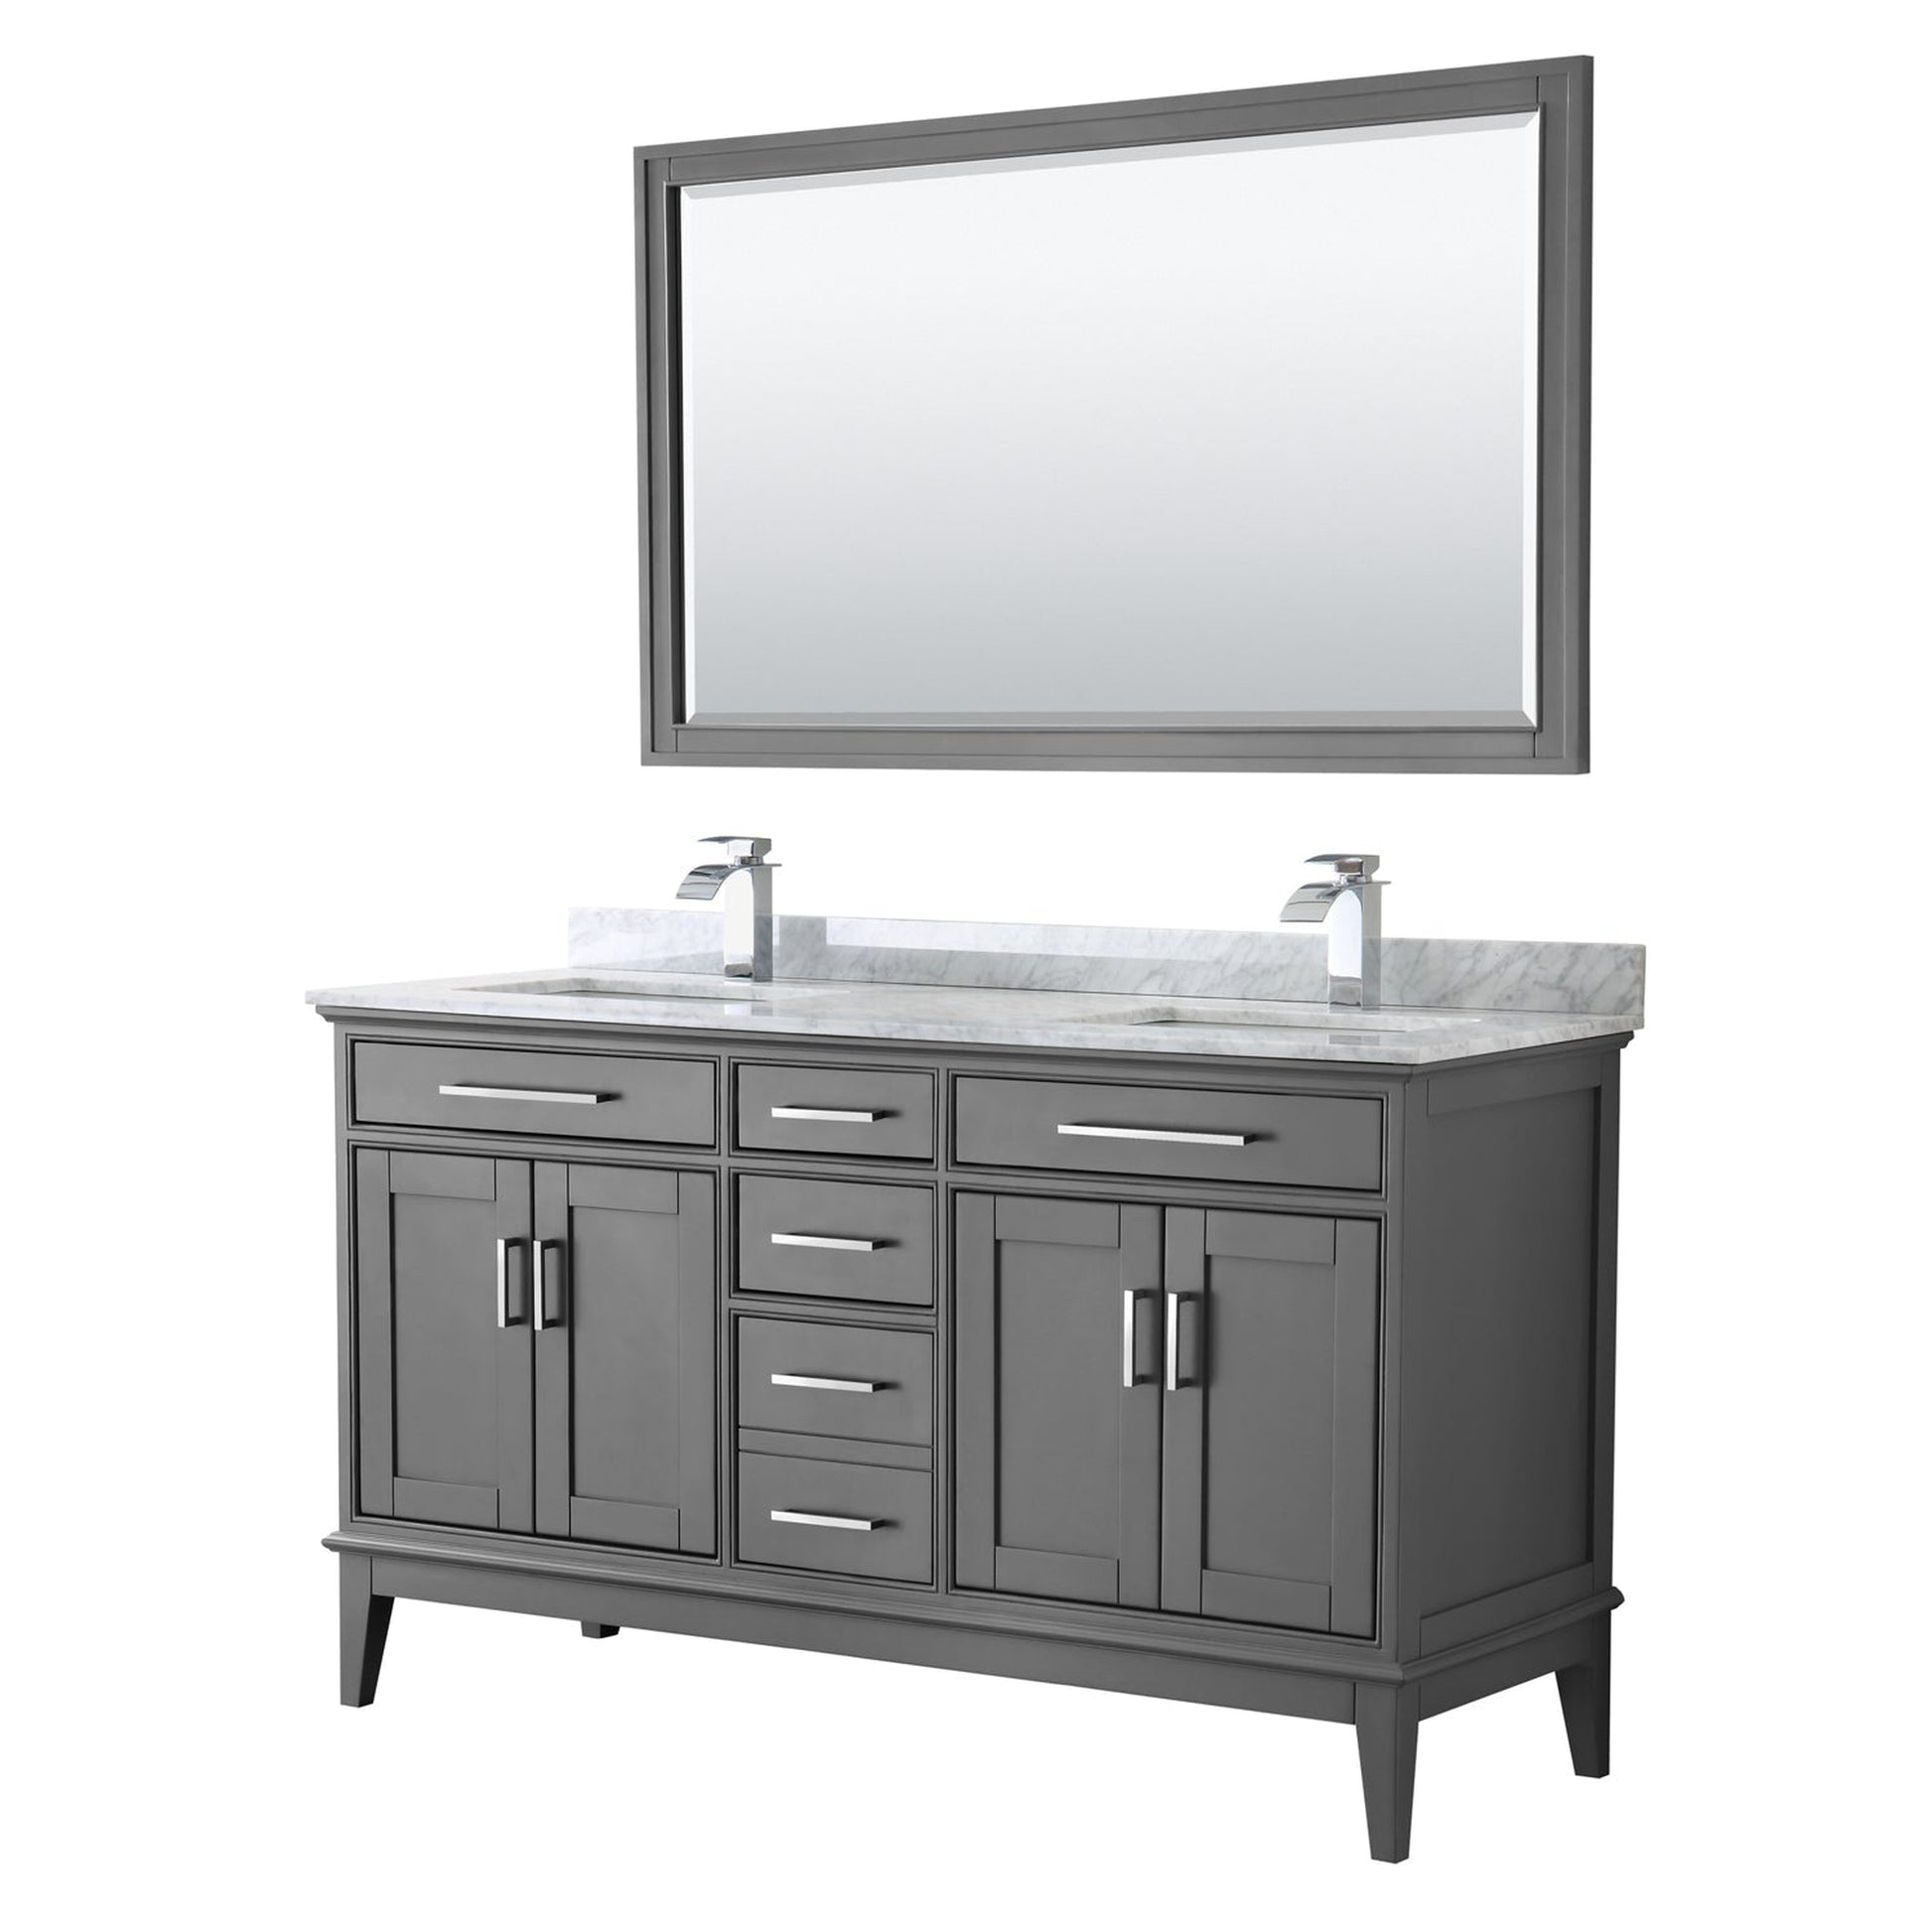 Wyndham Collection Margate 60" Double Bathroom Dark Gray Vanity With White Carrara Marble Countertop, Undermount Square Sink And 56" Mirror